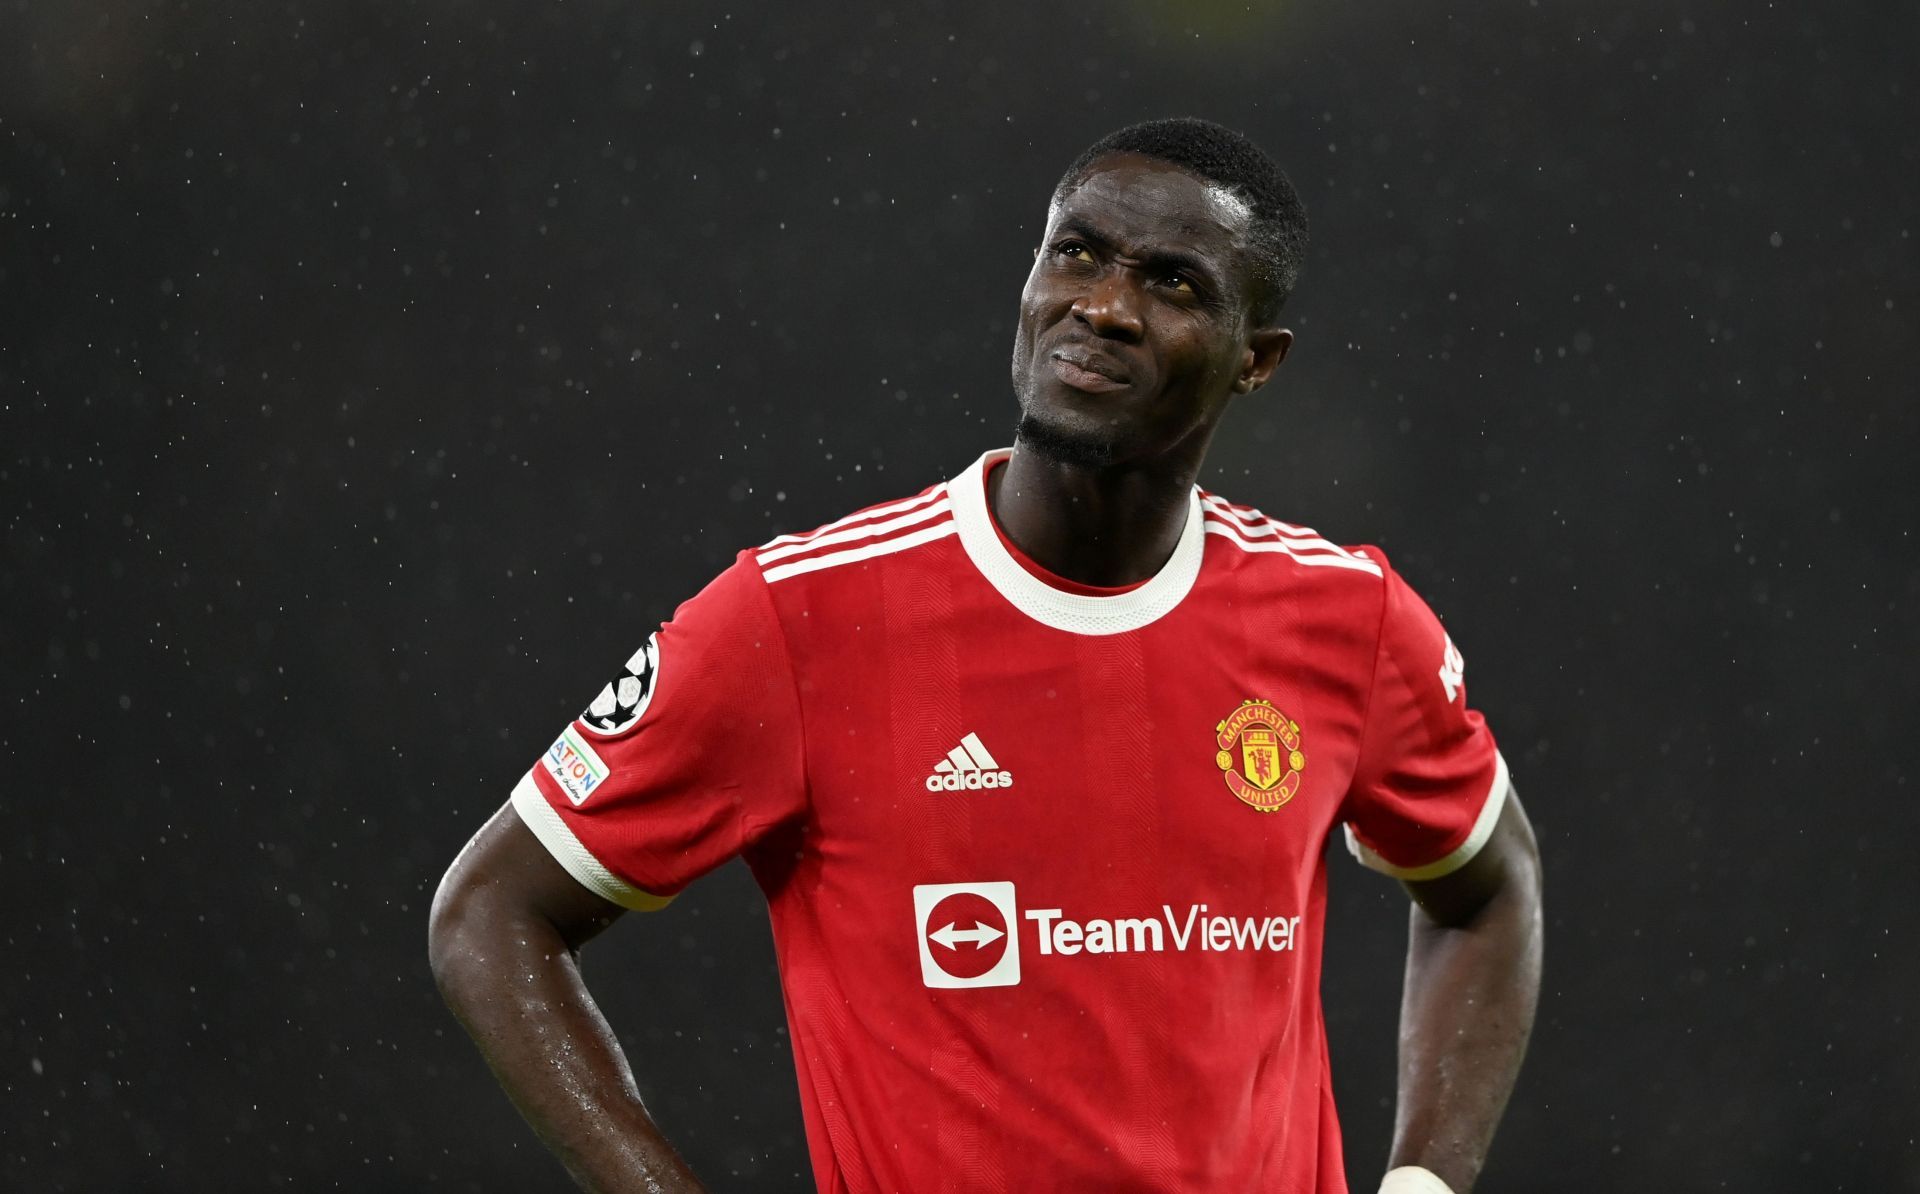 AC Milan have ended their interest in Bailly.